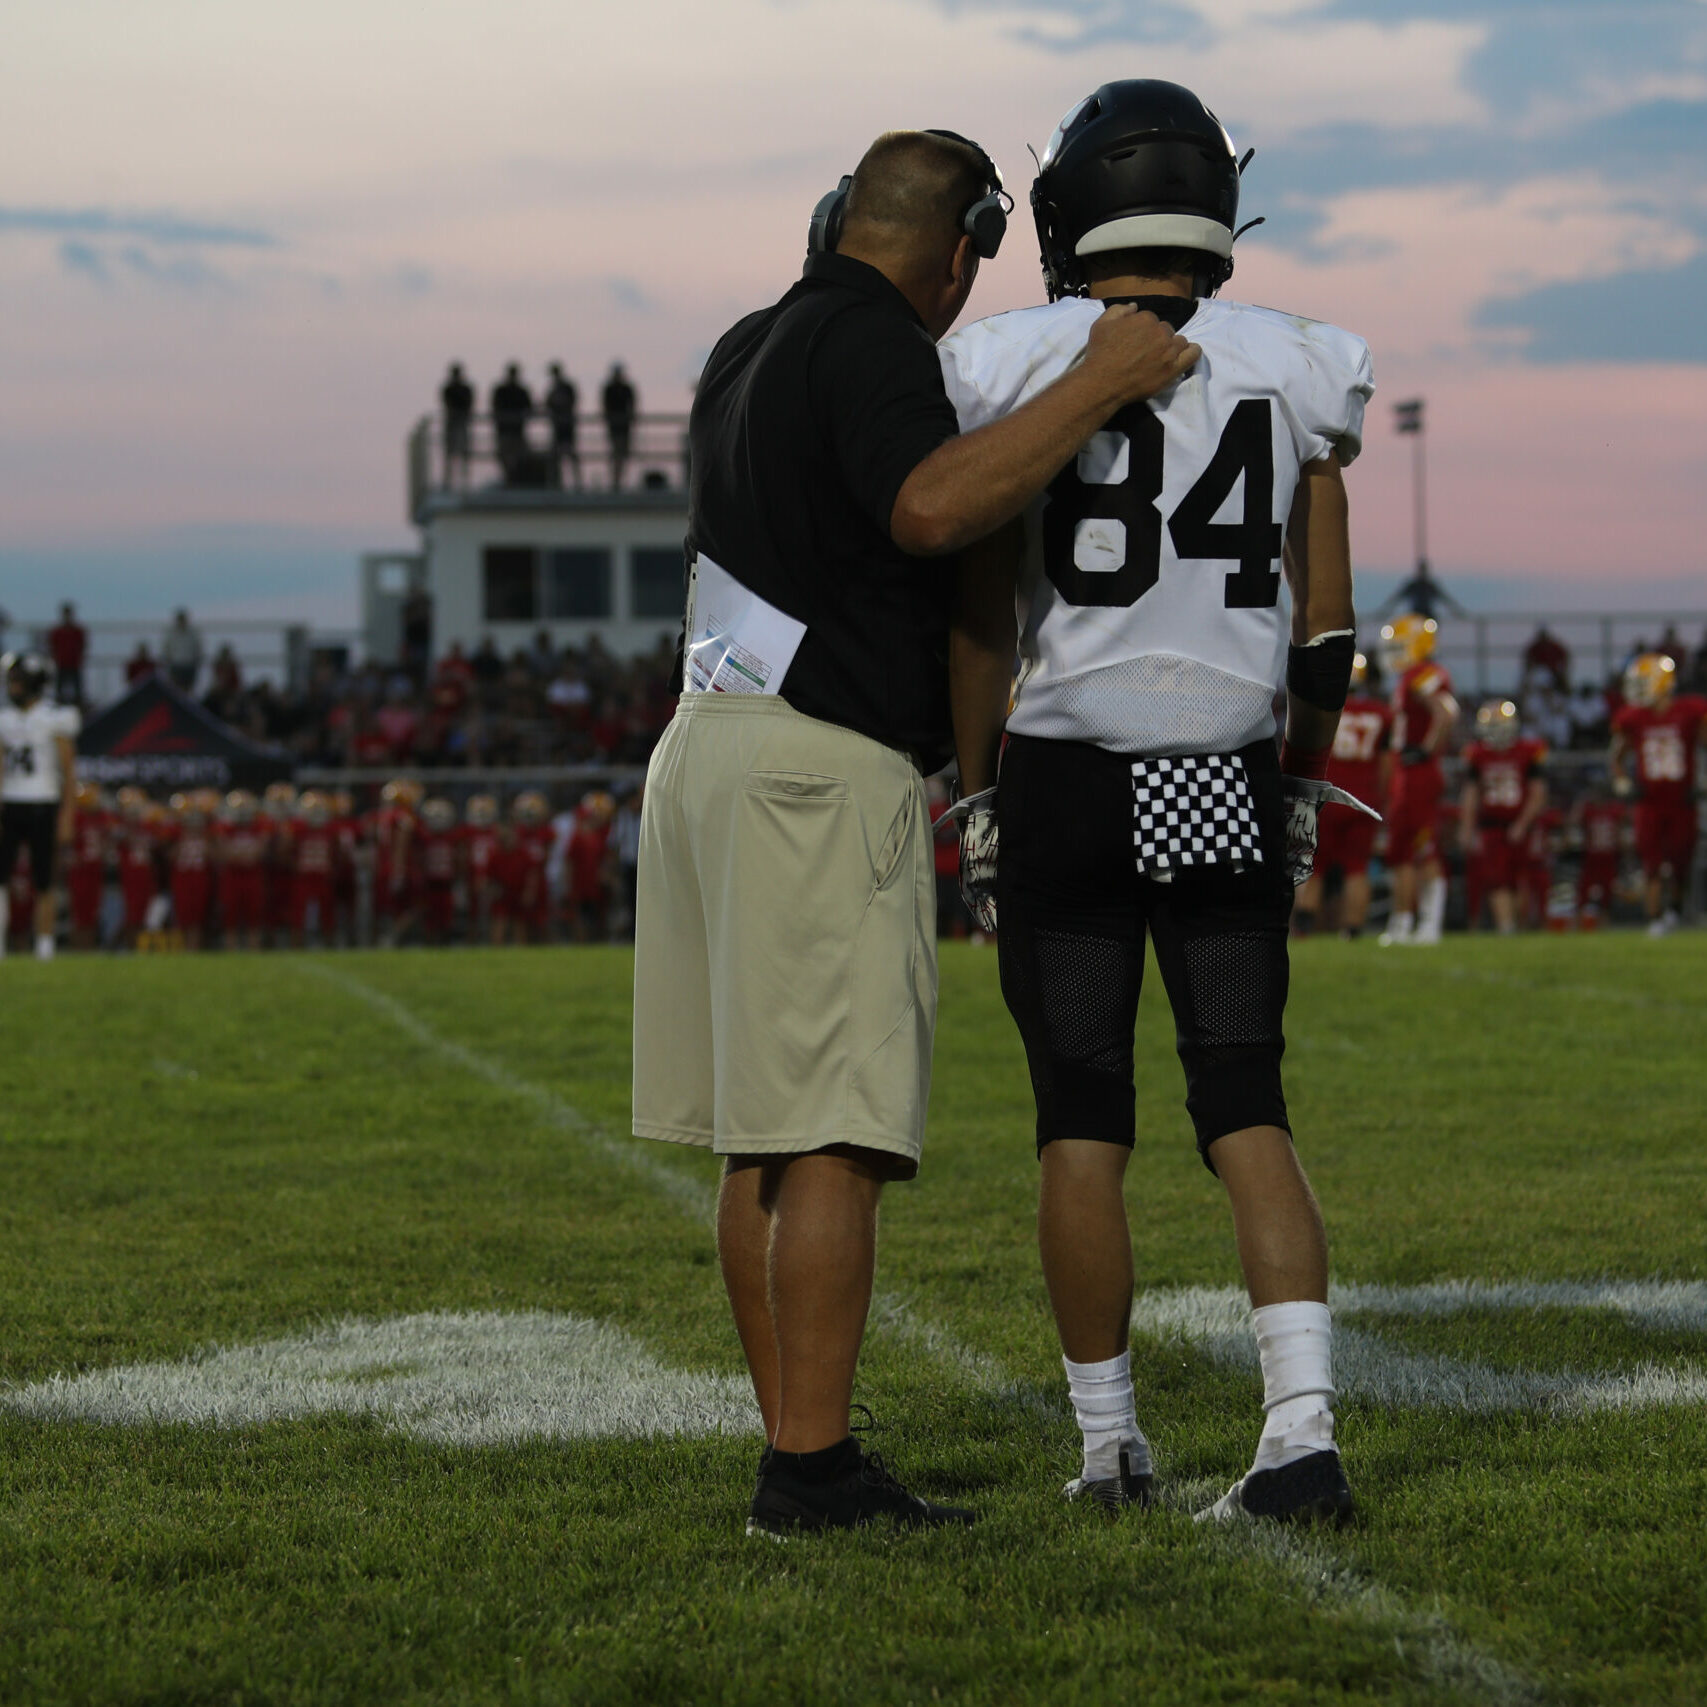 Larry Cox, the Franklin head coach, gives a play call to Junior Creager. Fenwick hosted the Franklin Wildcats, in week one of high school football. Fenwick won the game 14 to 2.